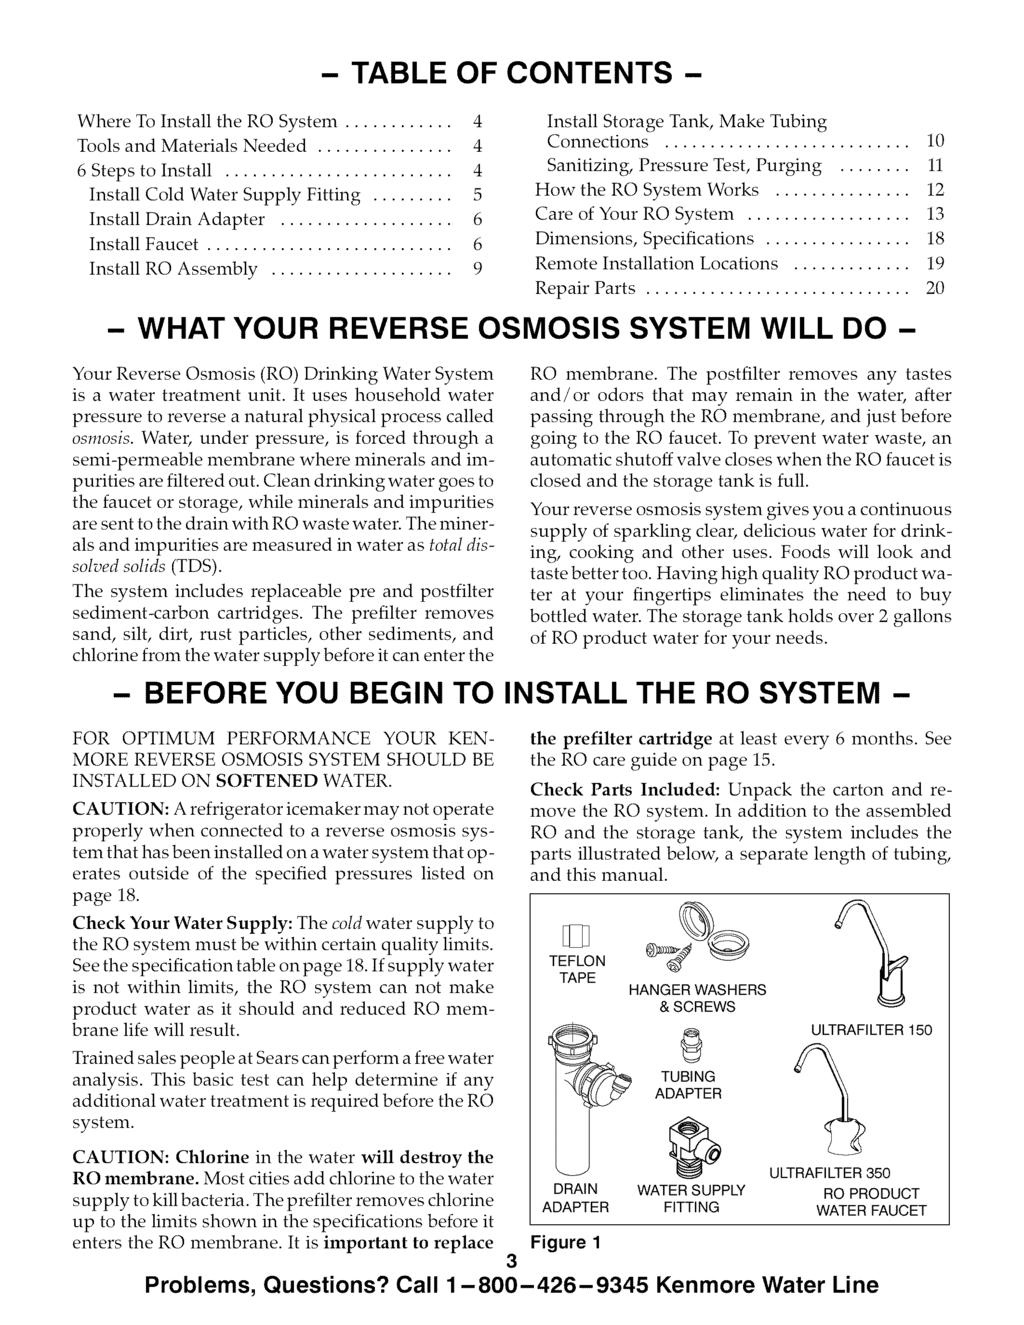 - TABLE OF CONTENTS - Where To Install the RO System... 4 Tools and Materials Needed... 4 6 Steps to Install... 4 Install Cold Water Supply Fitting... 5 Install Drain Adapter... 6 Install Faucet.